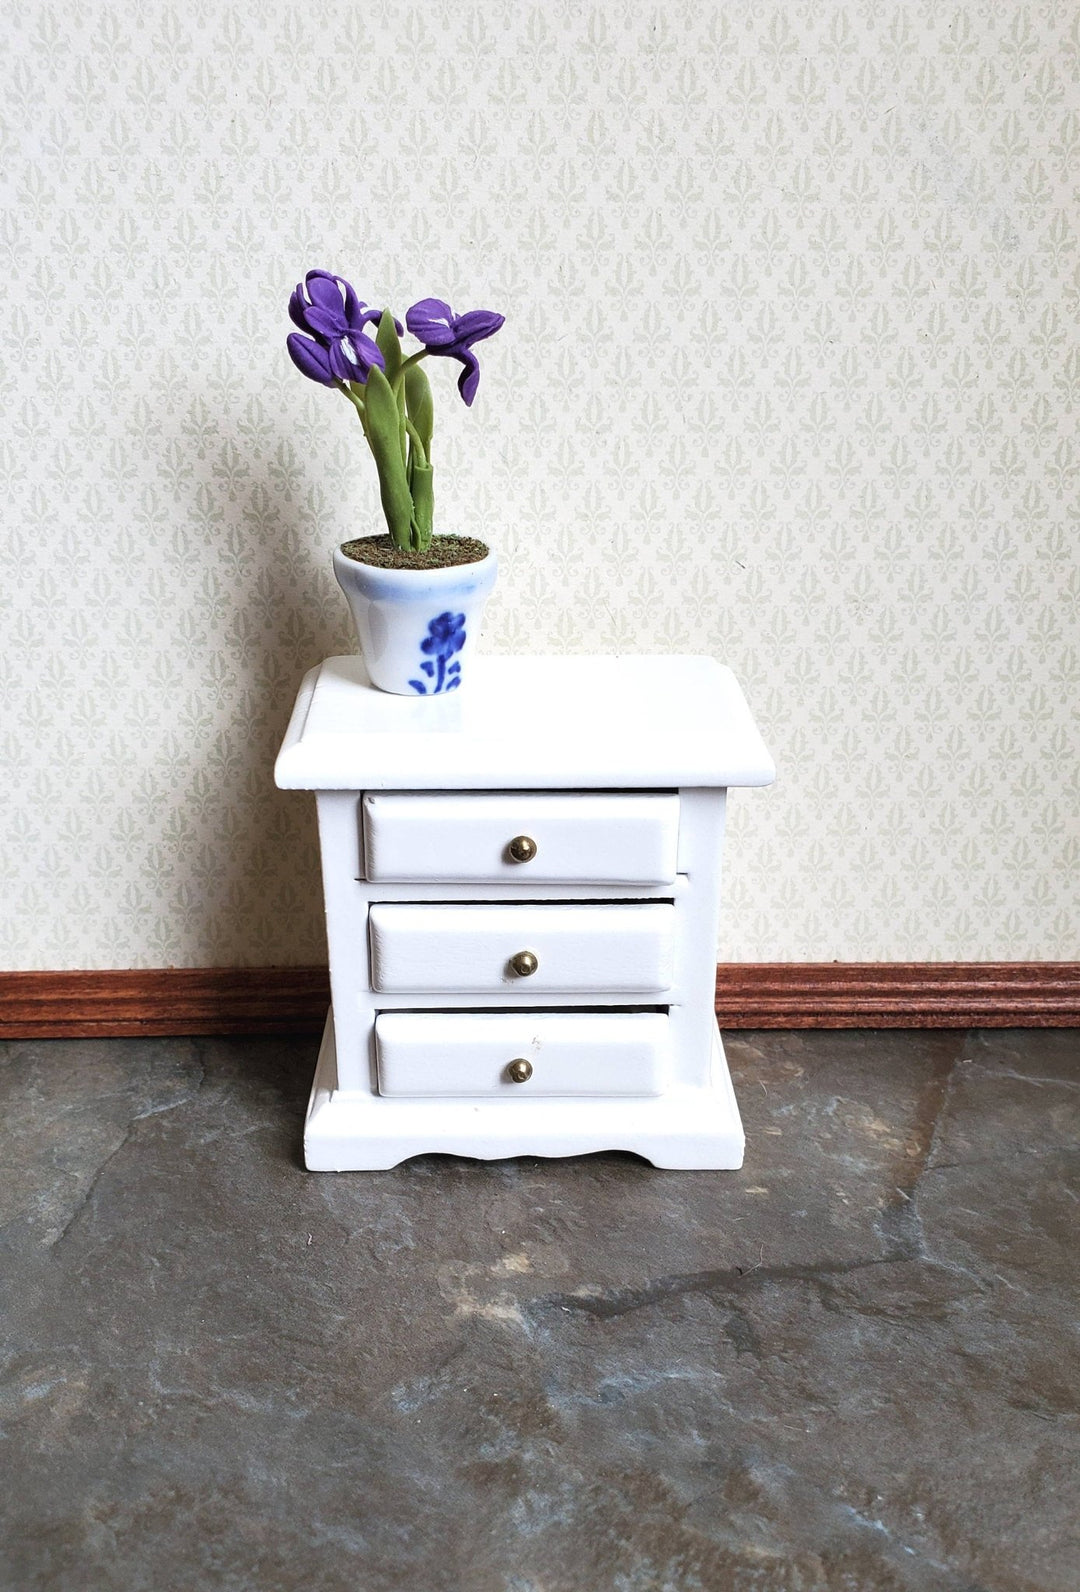 Dollhouse Miniature Nightstand Side Table White 3 Drawers 1:12 Scale Furniture - Miniature Crush